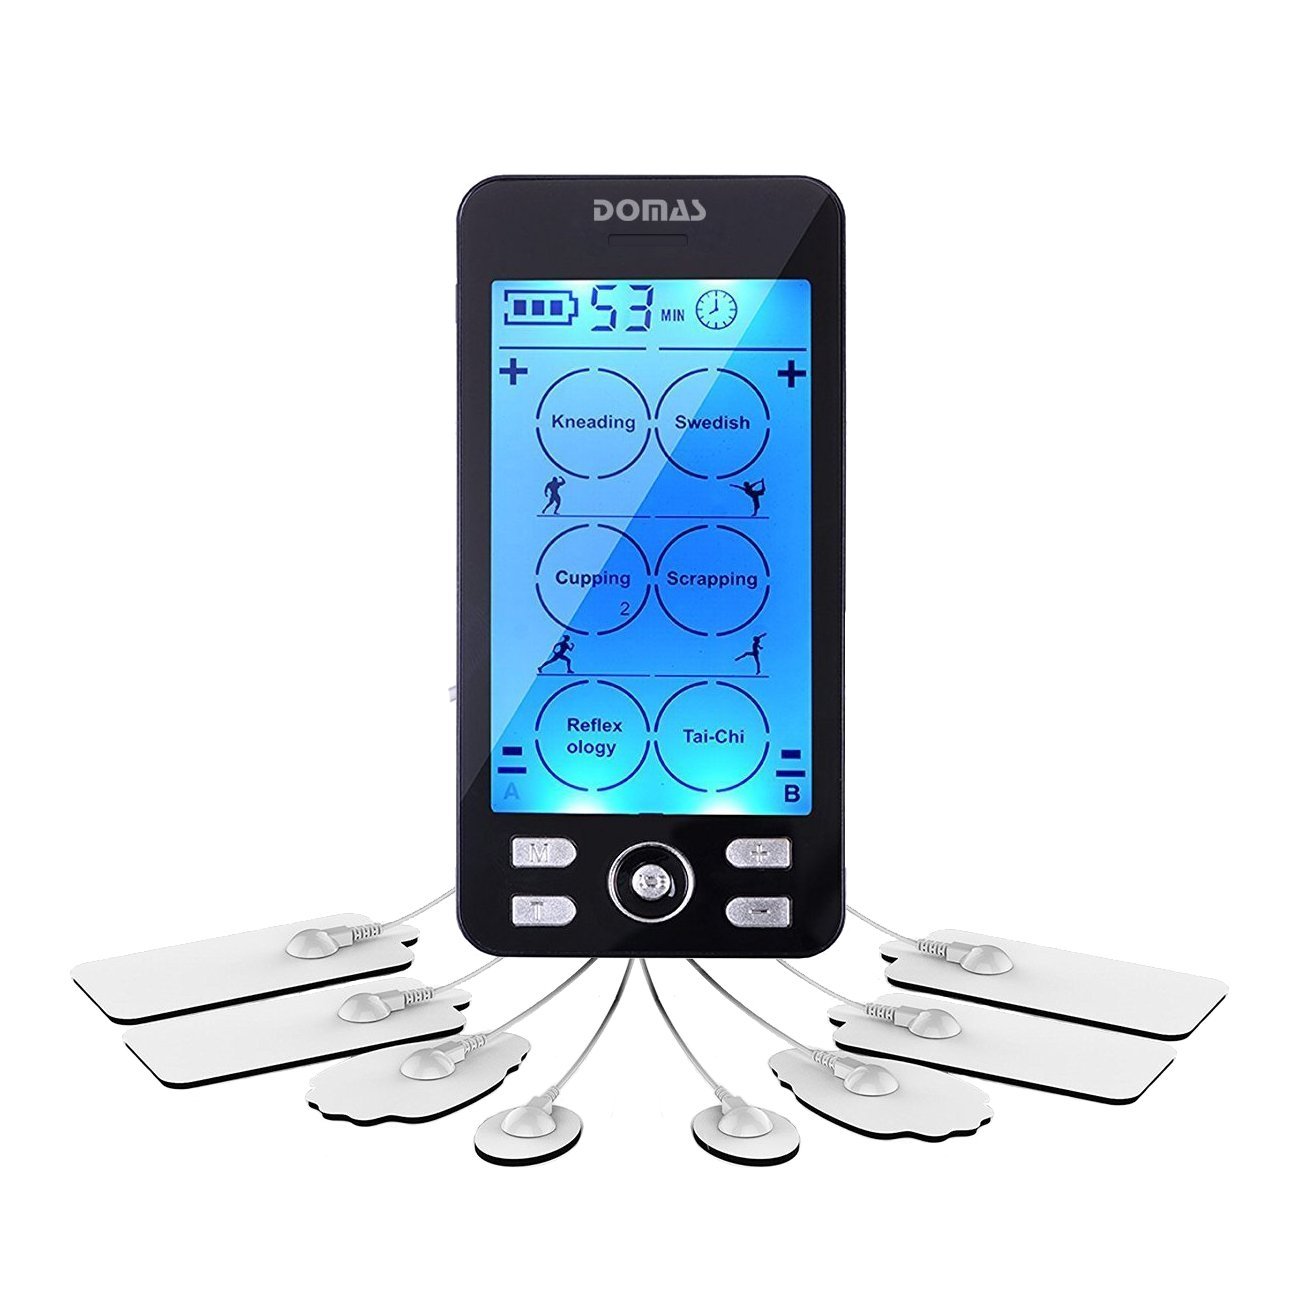 Image of a TENS unit, with a clickable link to Amazon.